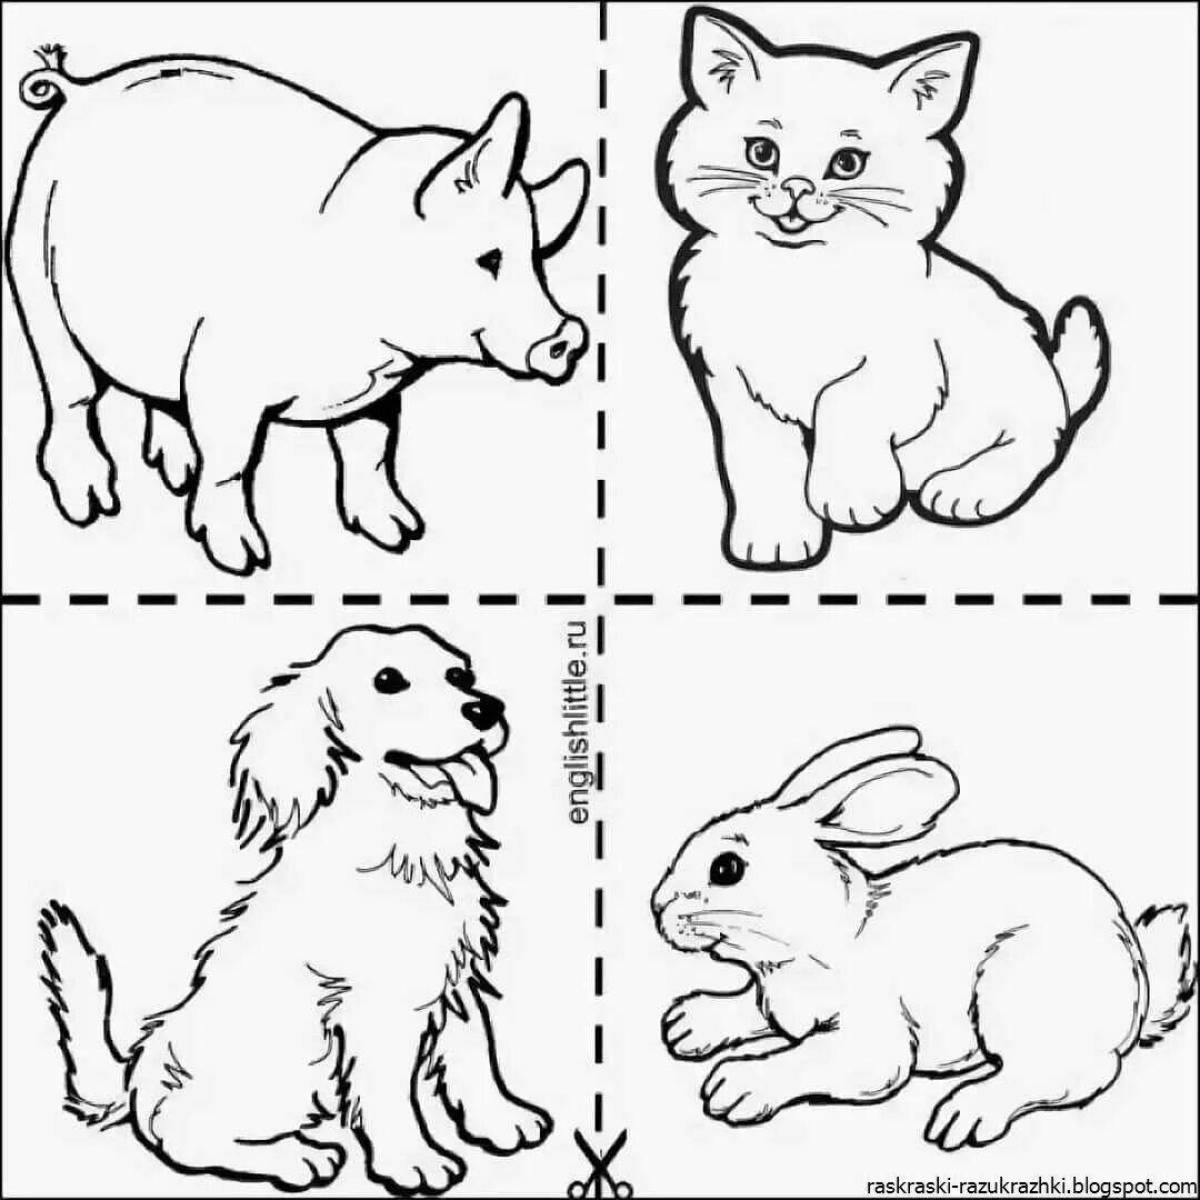 Creative coloring book for 2-3 year olds Pets